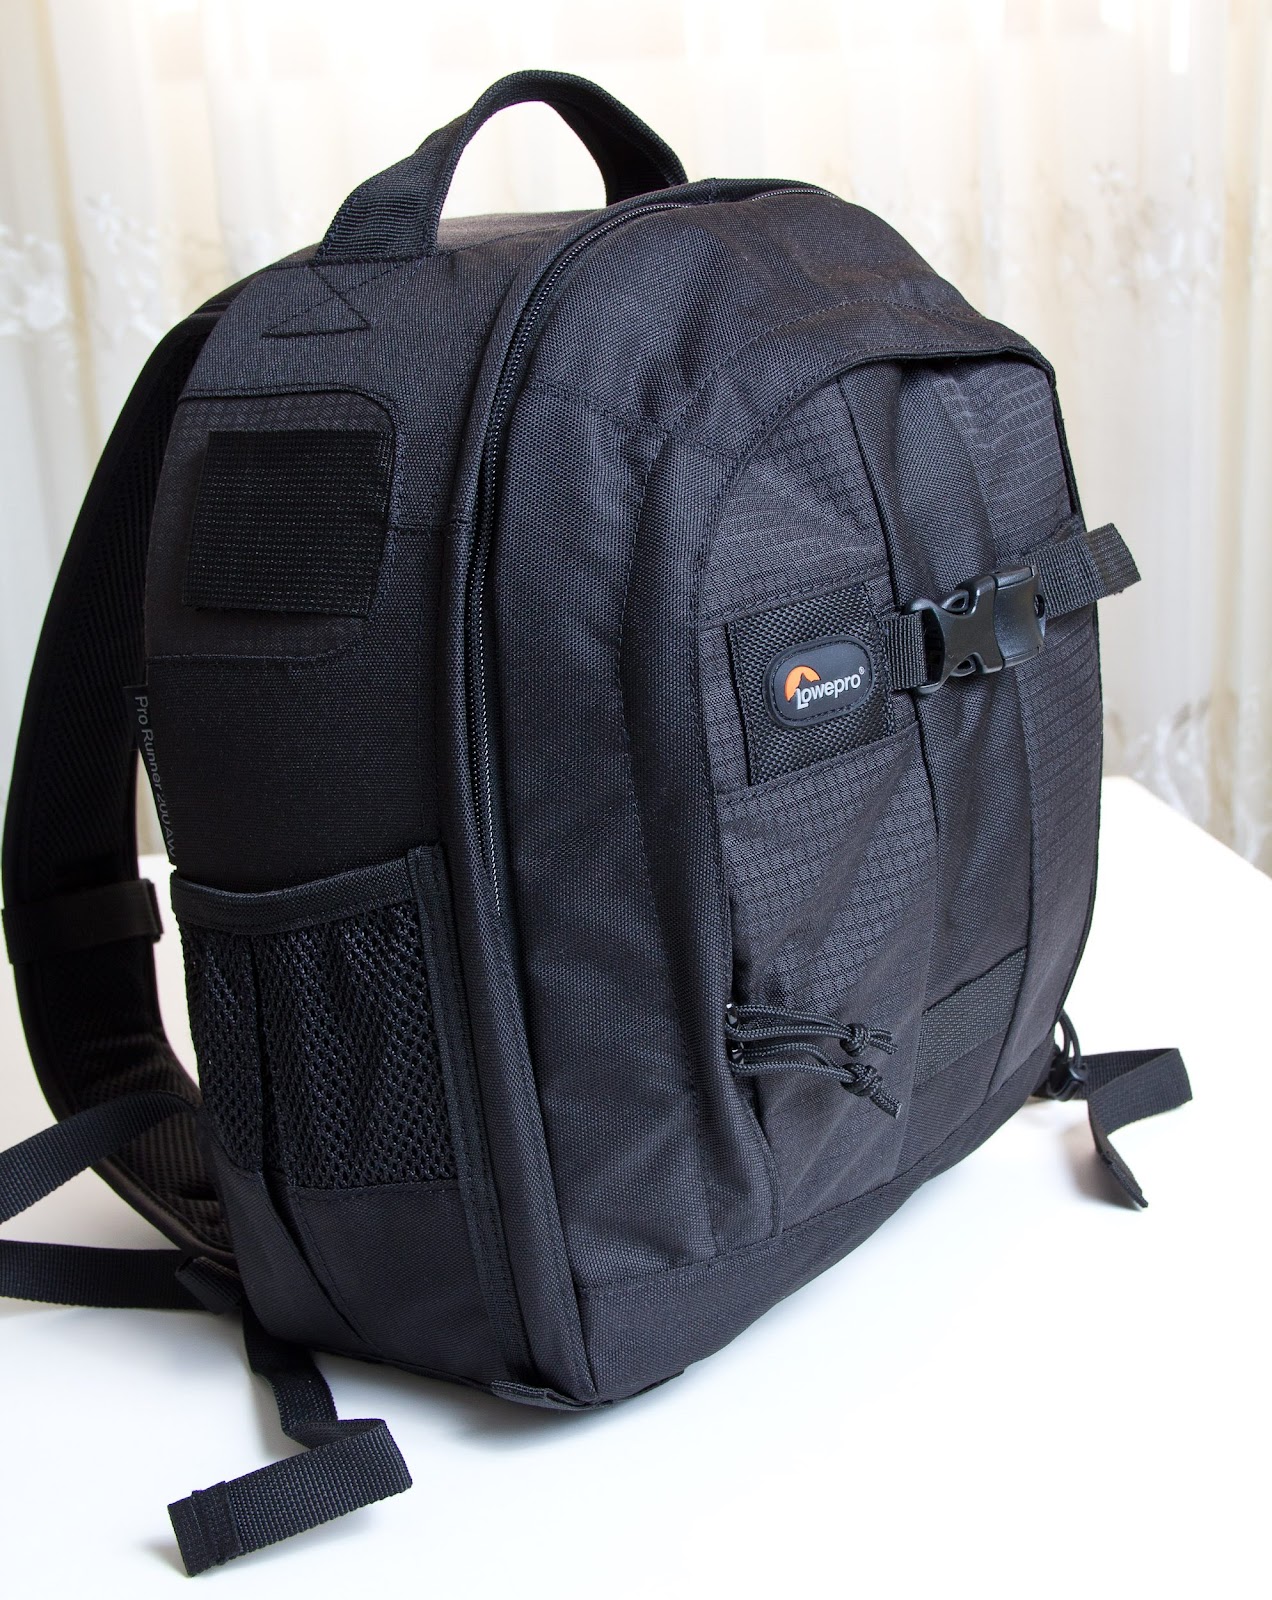 Better Family Photos: Camera Bag Review: Lowepro Pro Runner 200 AW